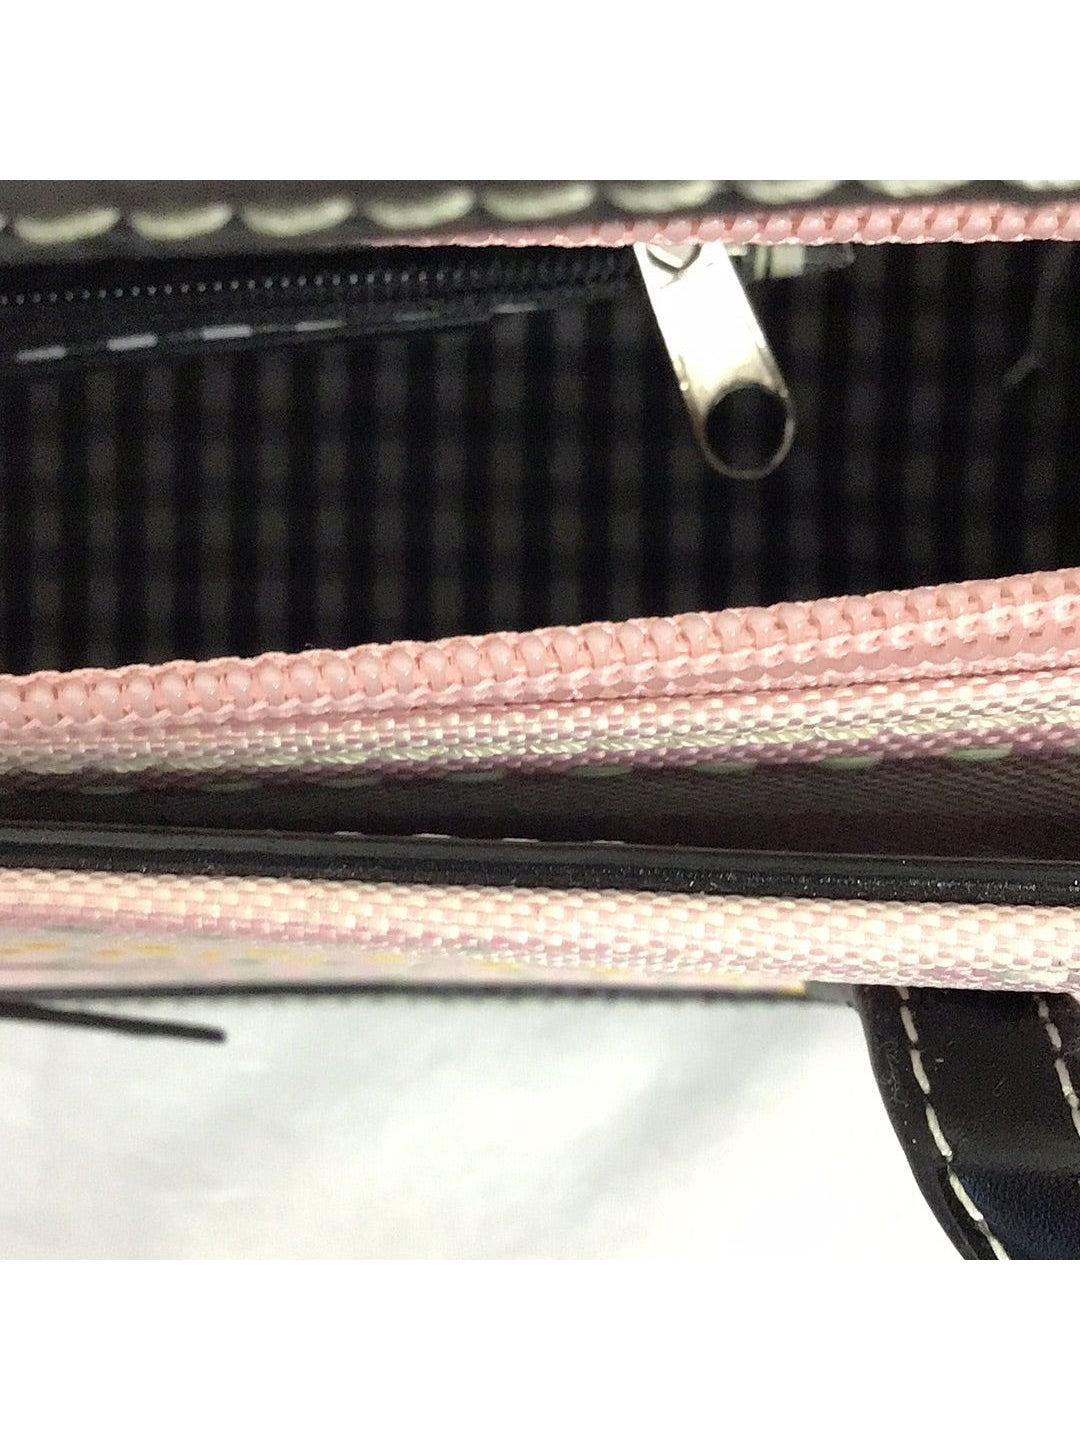 Ladies Pink Striped Small Multi Colored Handbag - The Kennedy Collective Thrift - 